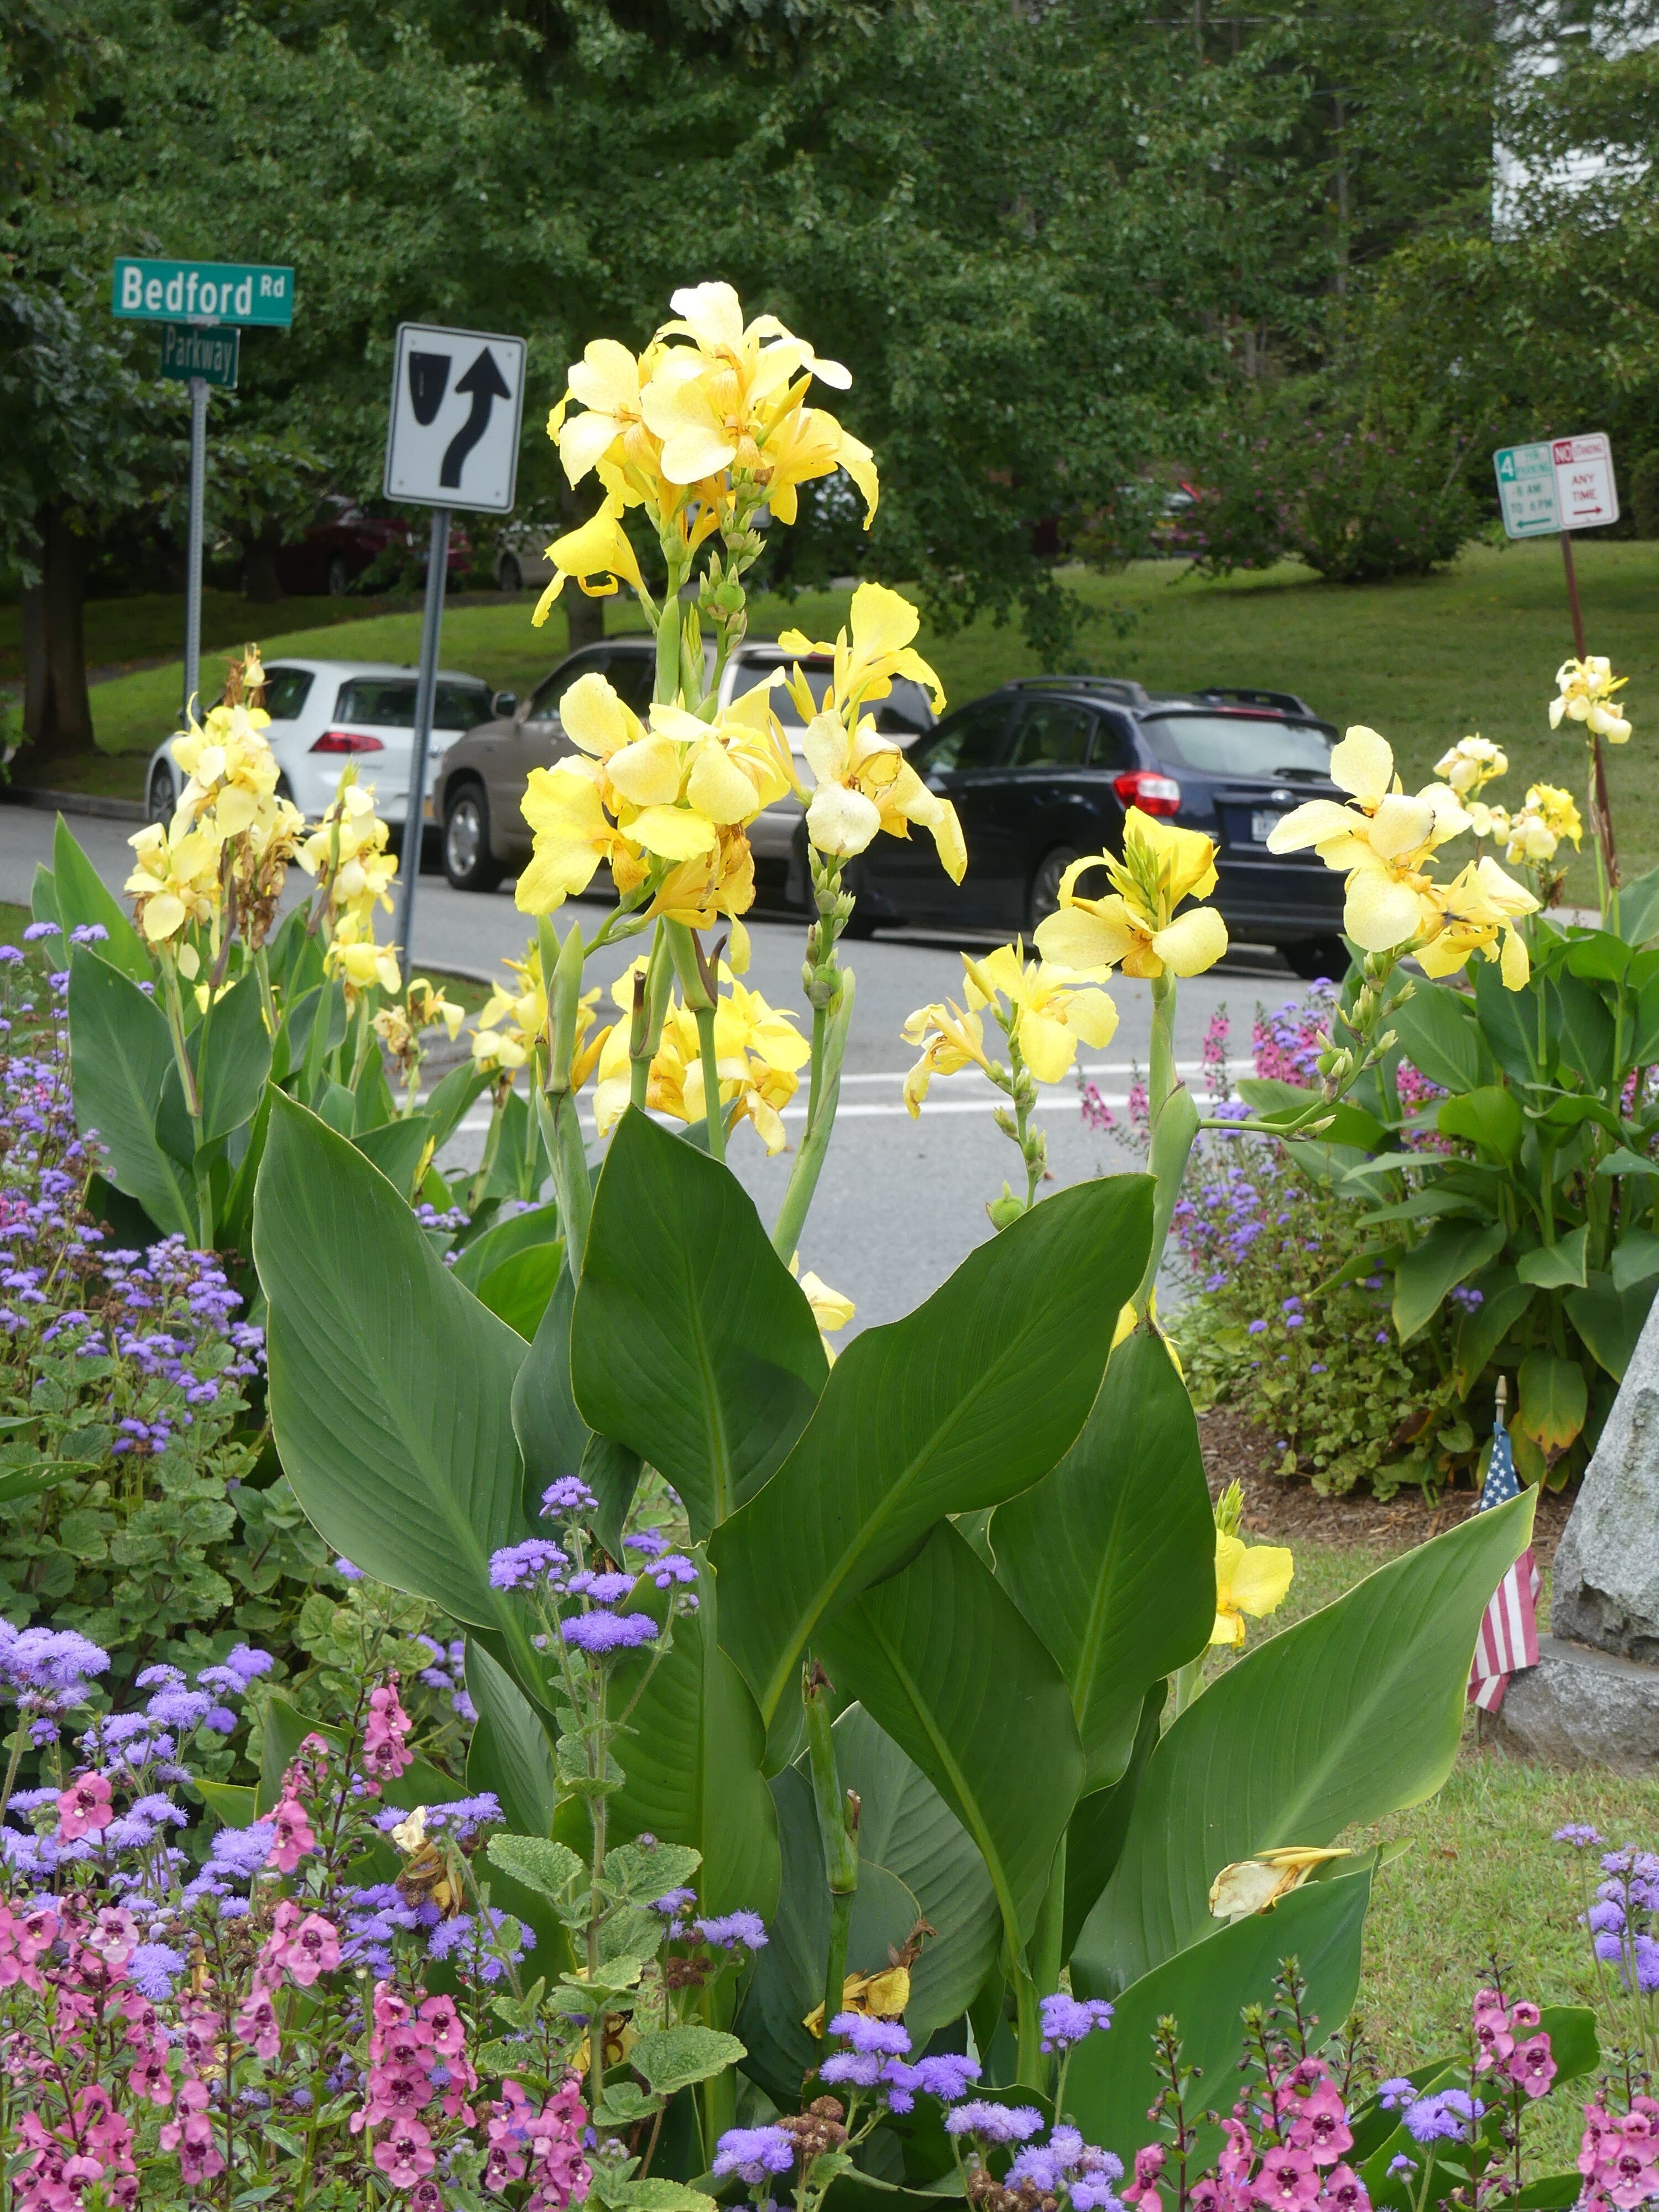 Yellow cannas in a municipal planting island in Katonah, New York, where they are on display every summer.
ANDREW MESSINGER